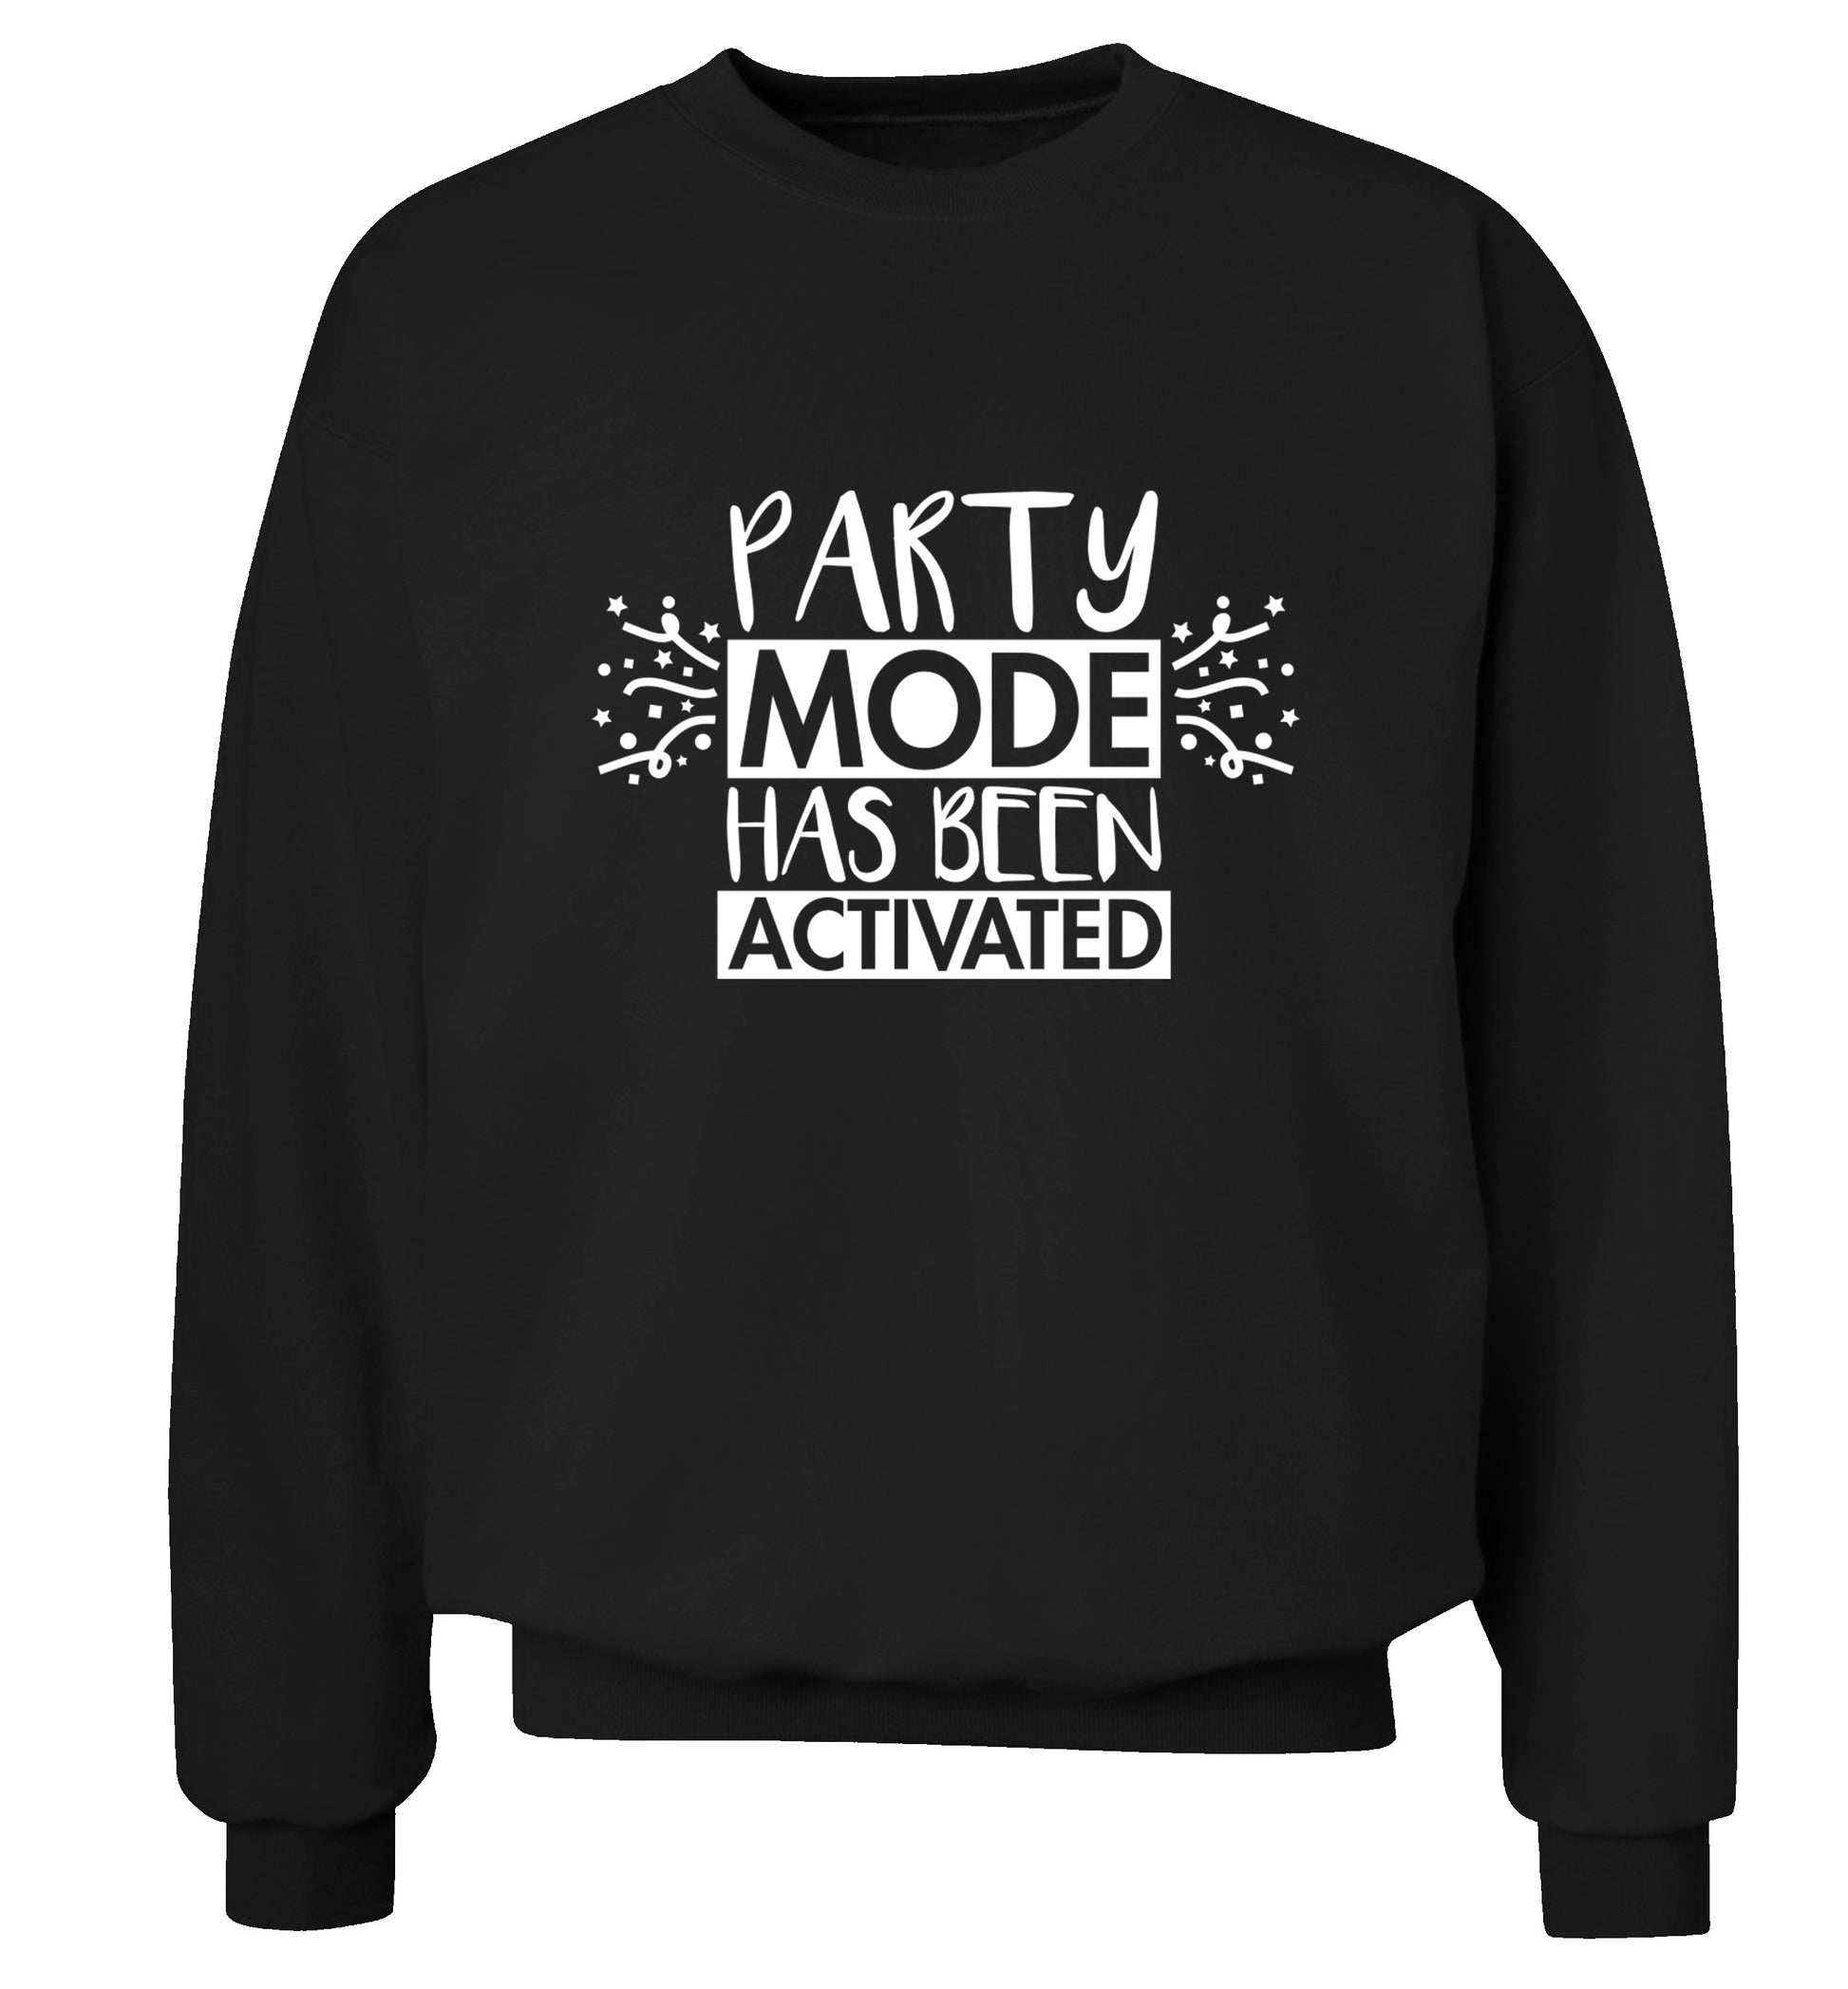 Please do not disturb party mode has been activated Adult's unisex black Sweater 2XL